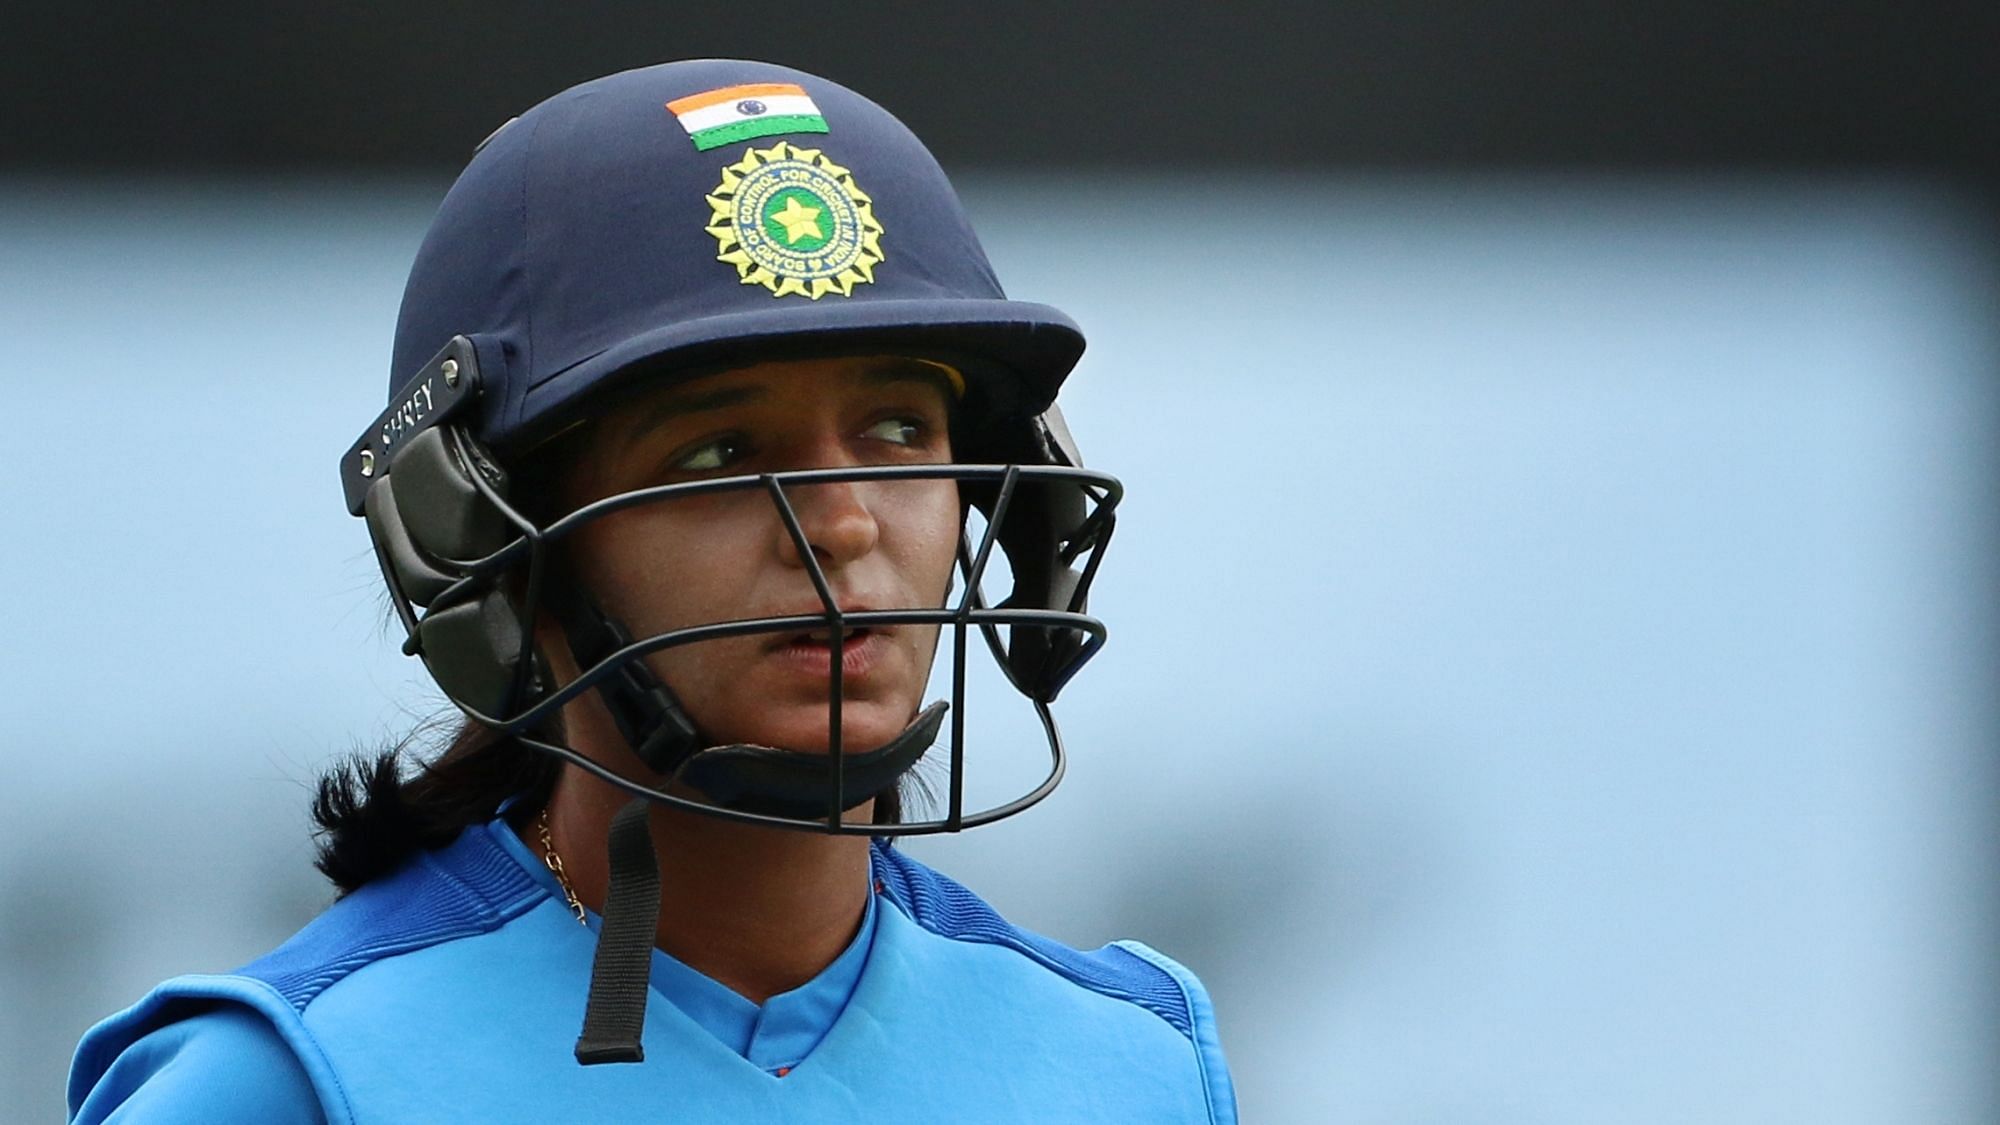 Harmanpreet Kaur was ruled out of the upcoming limited overs series against England with an ankle injury.